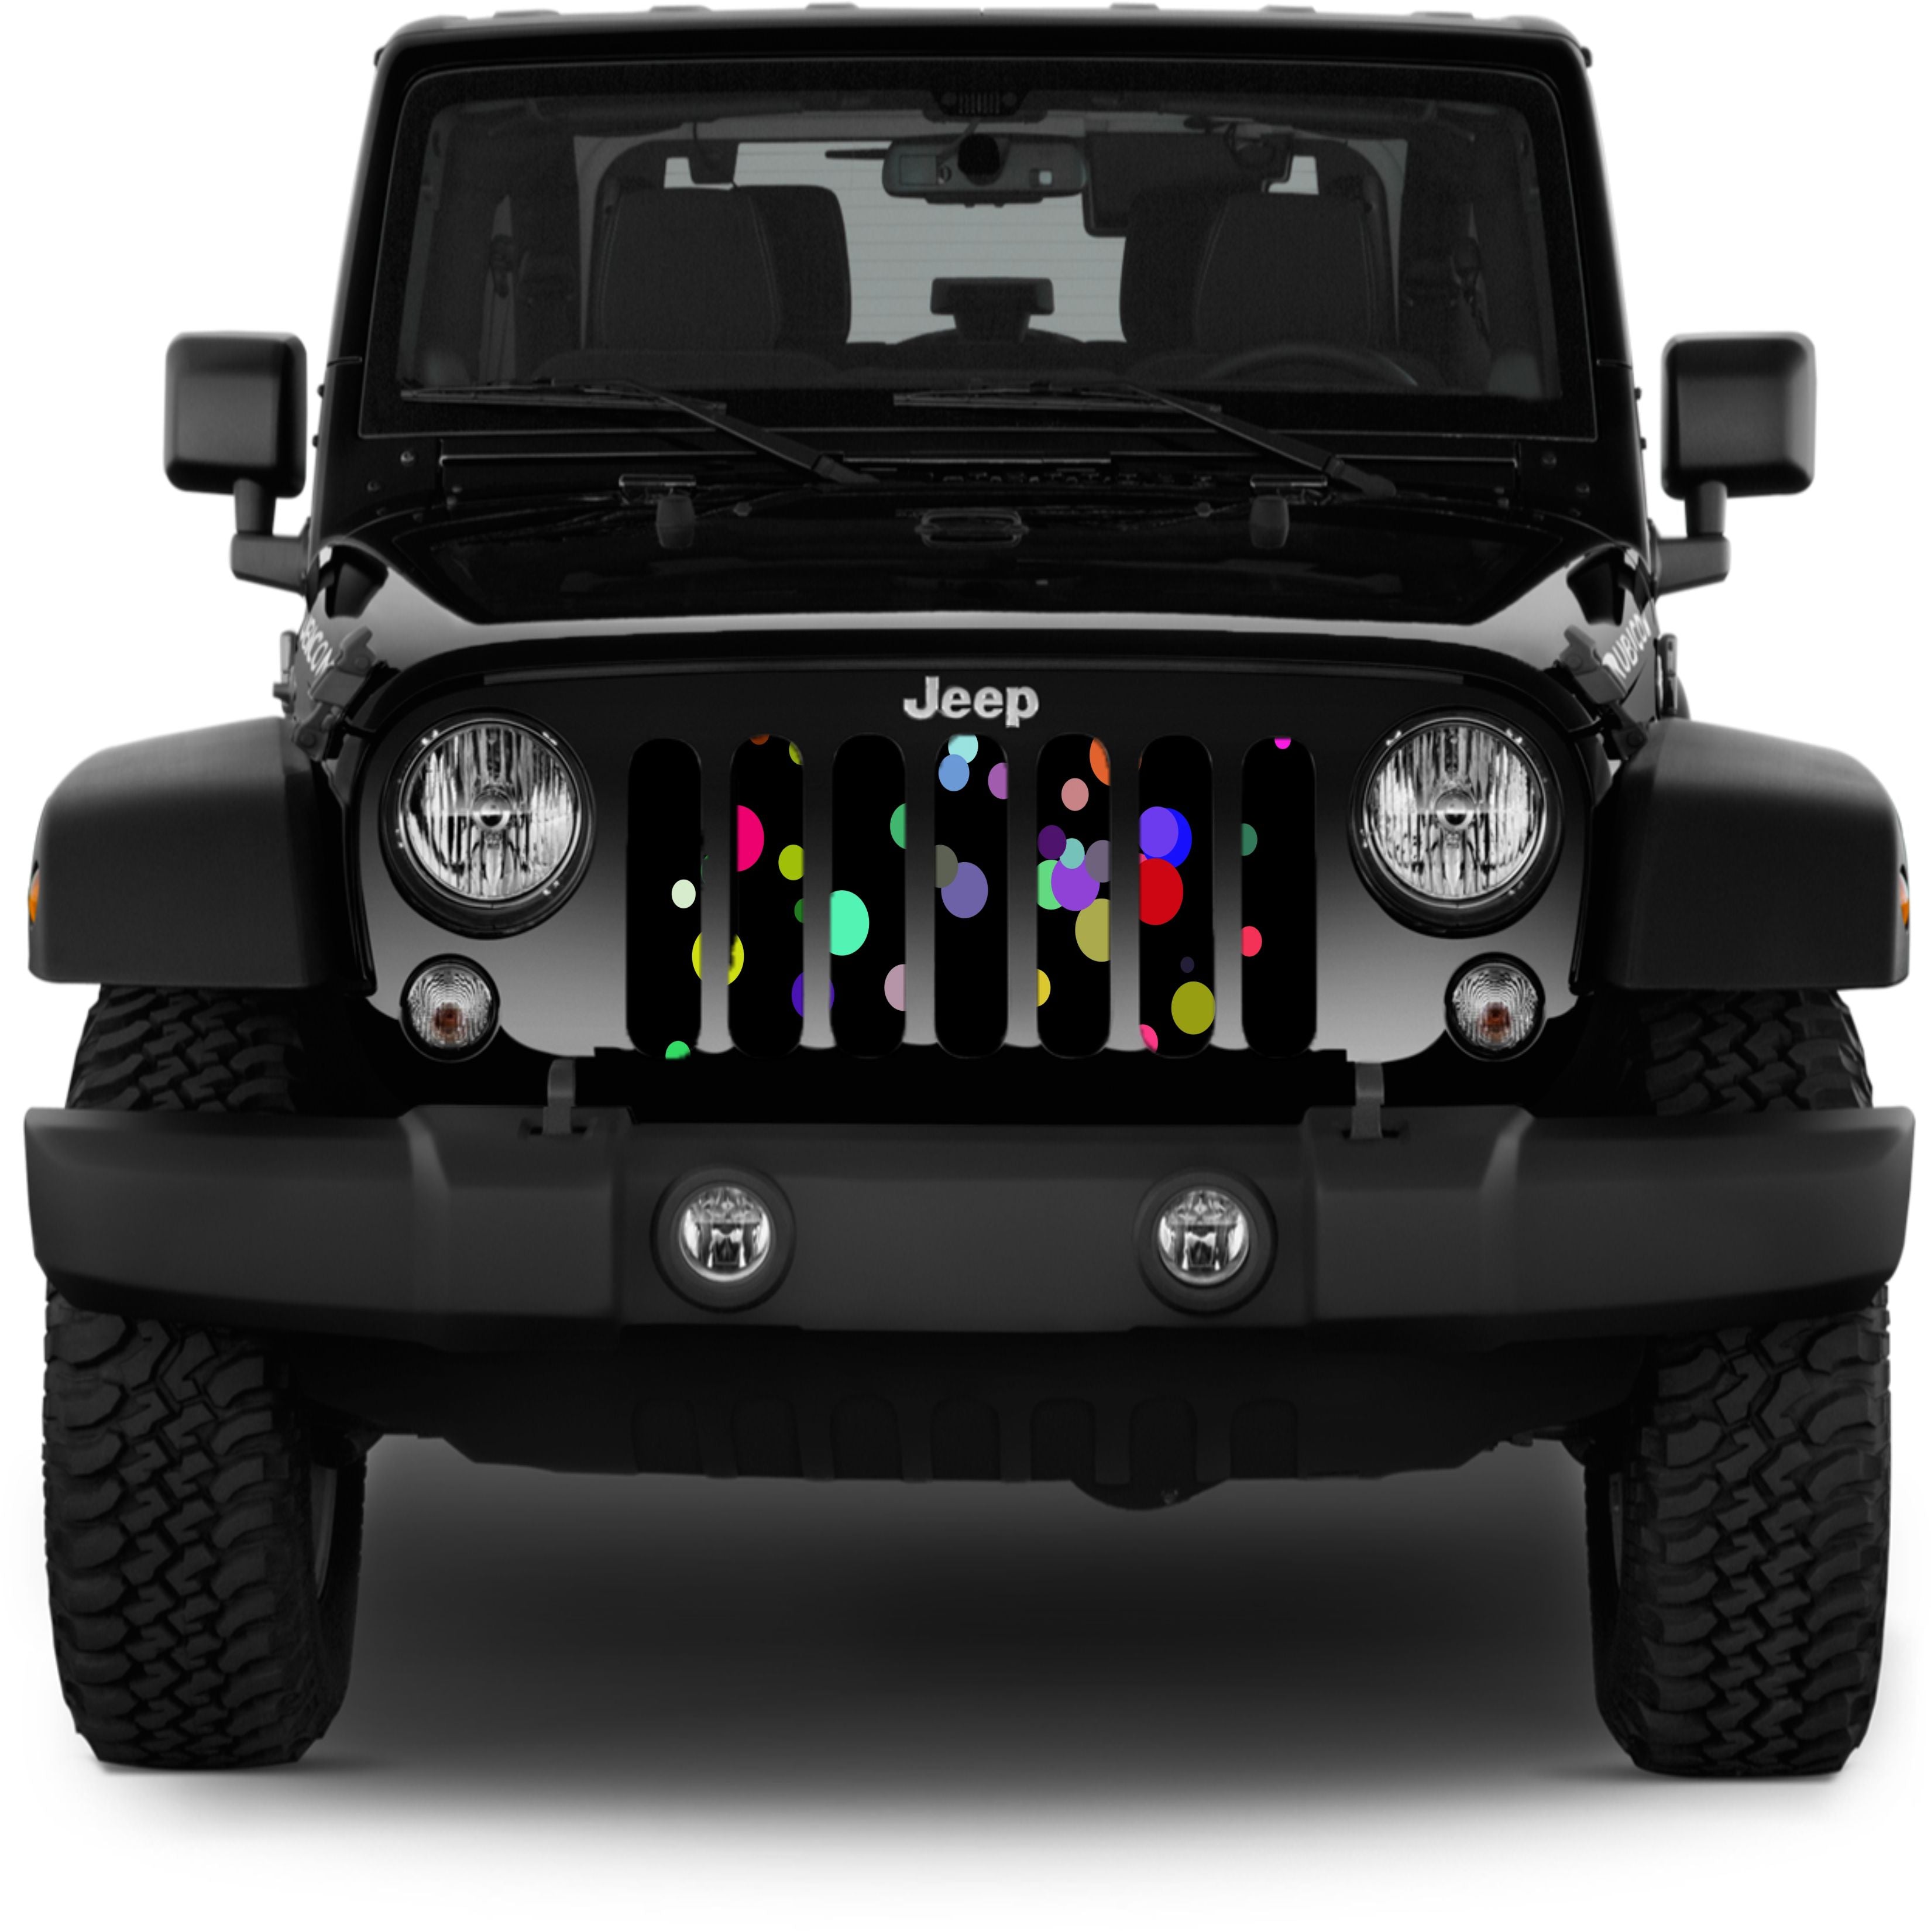 Add a pop of color with this multicolored polka dot design grille insert for Jeep. 